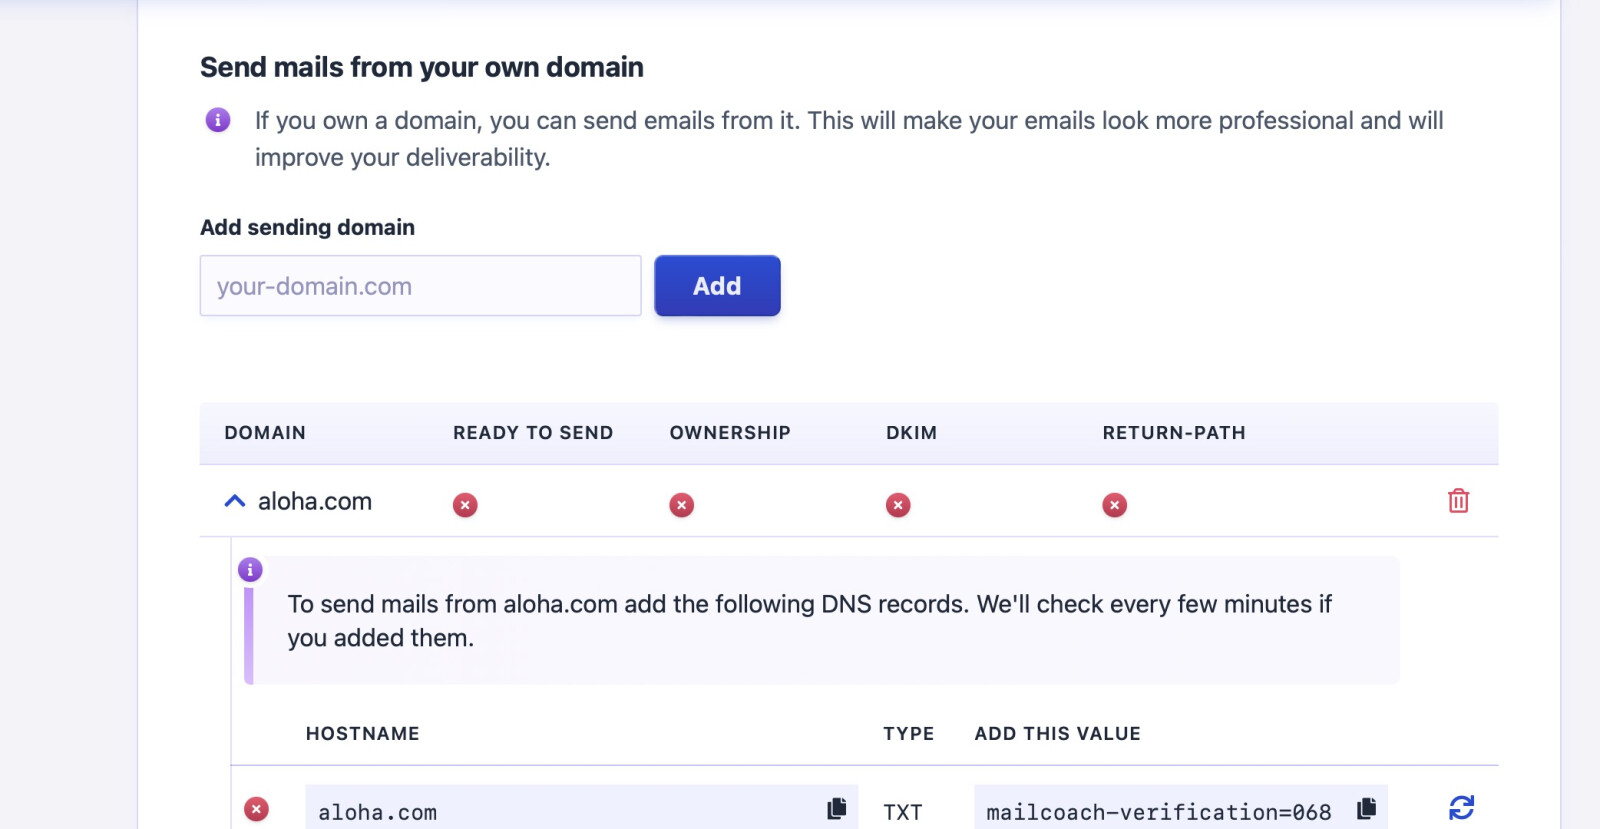 Email configuration screen - adding DNS records